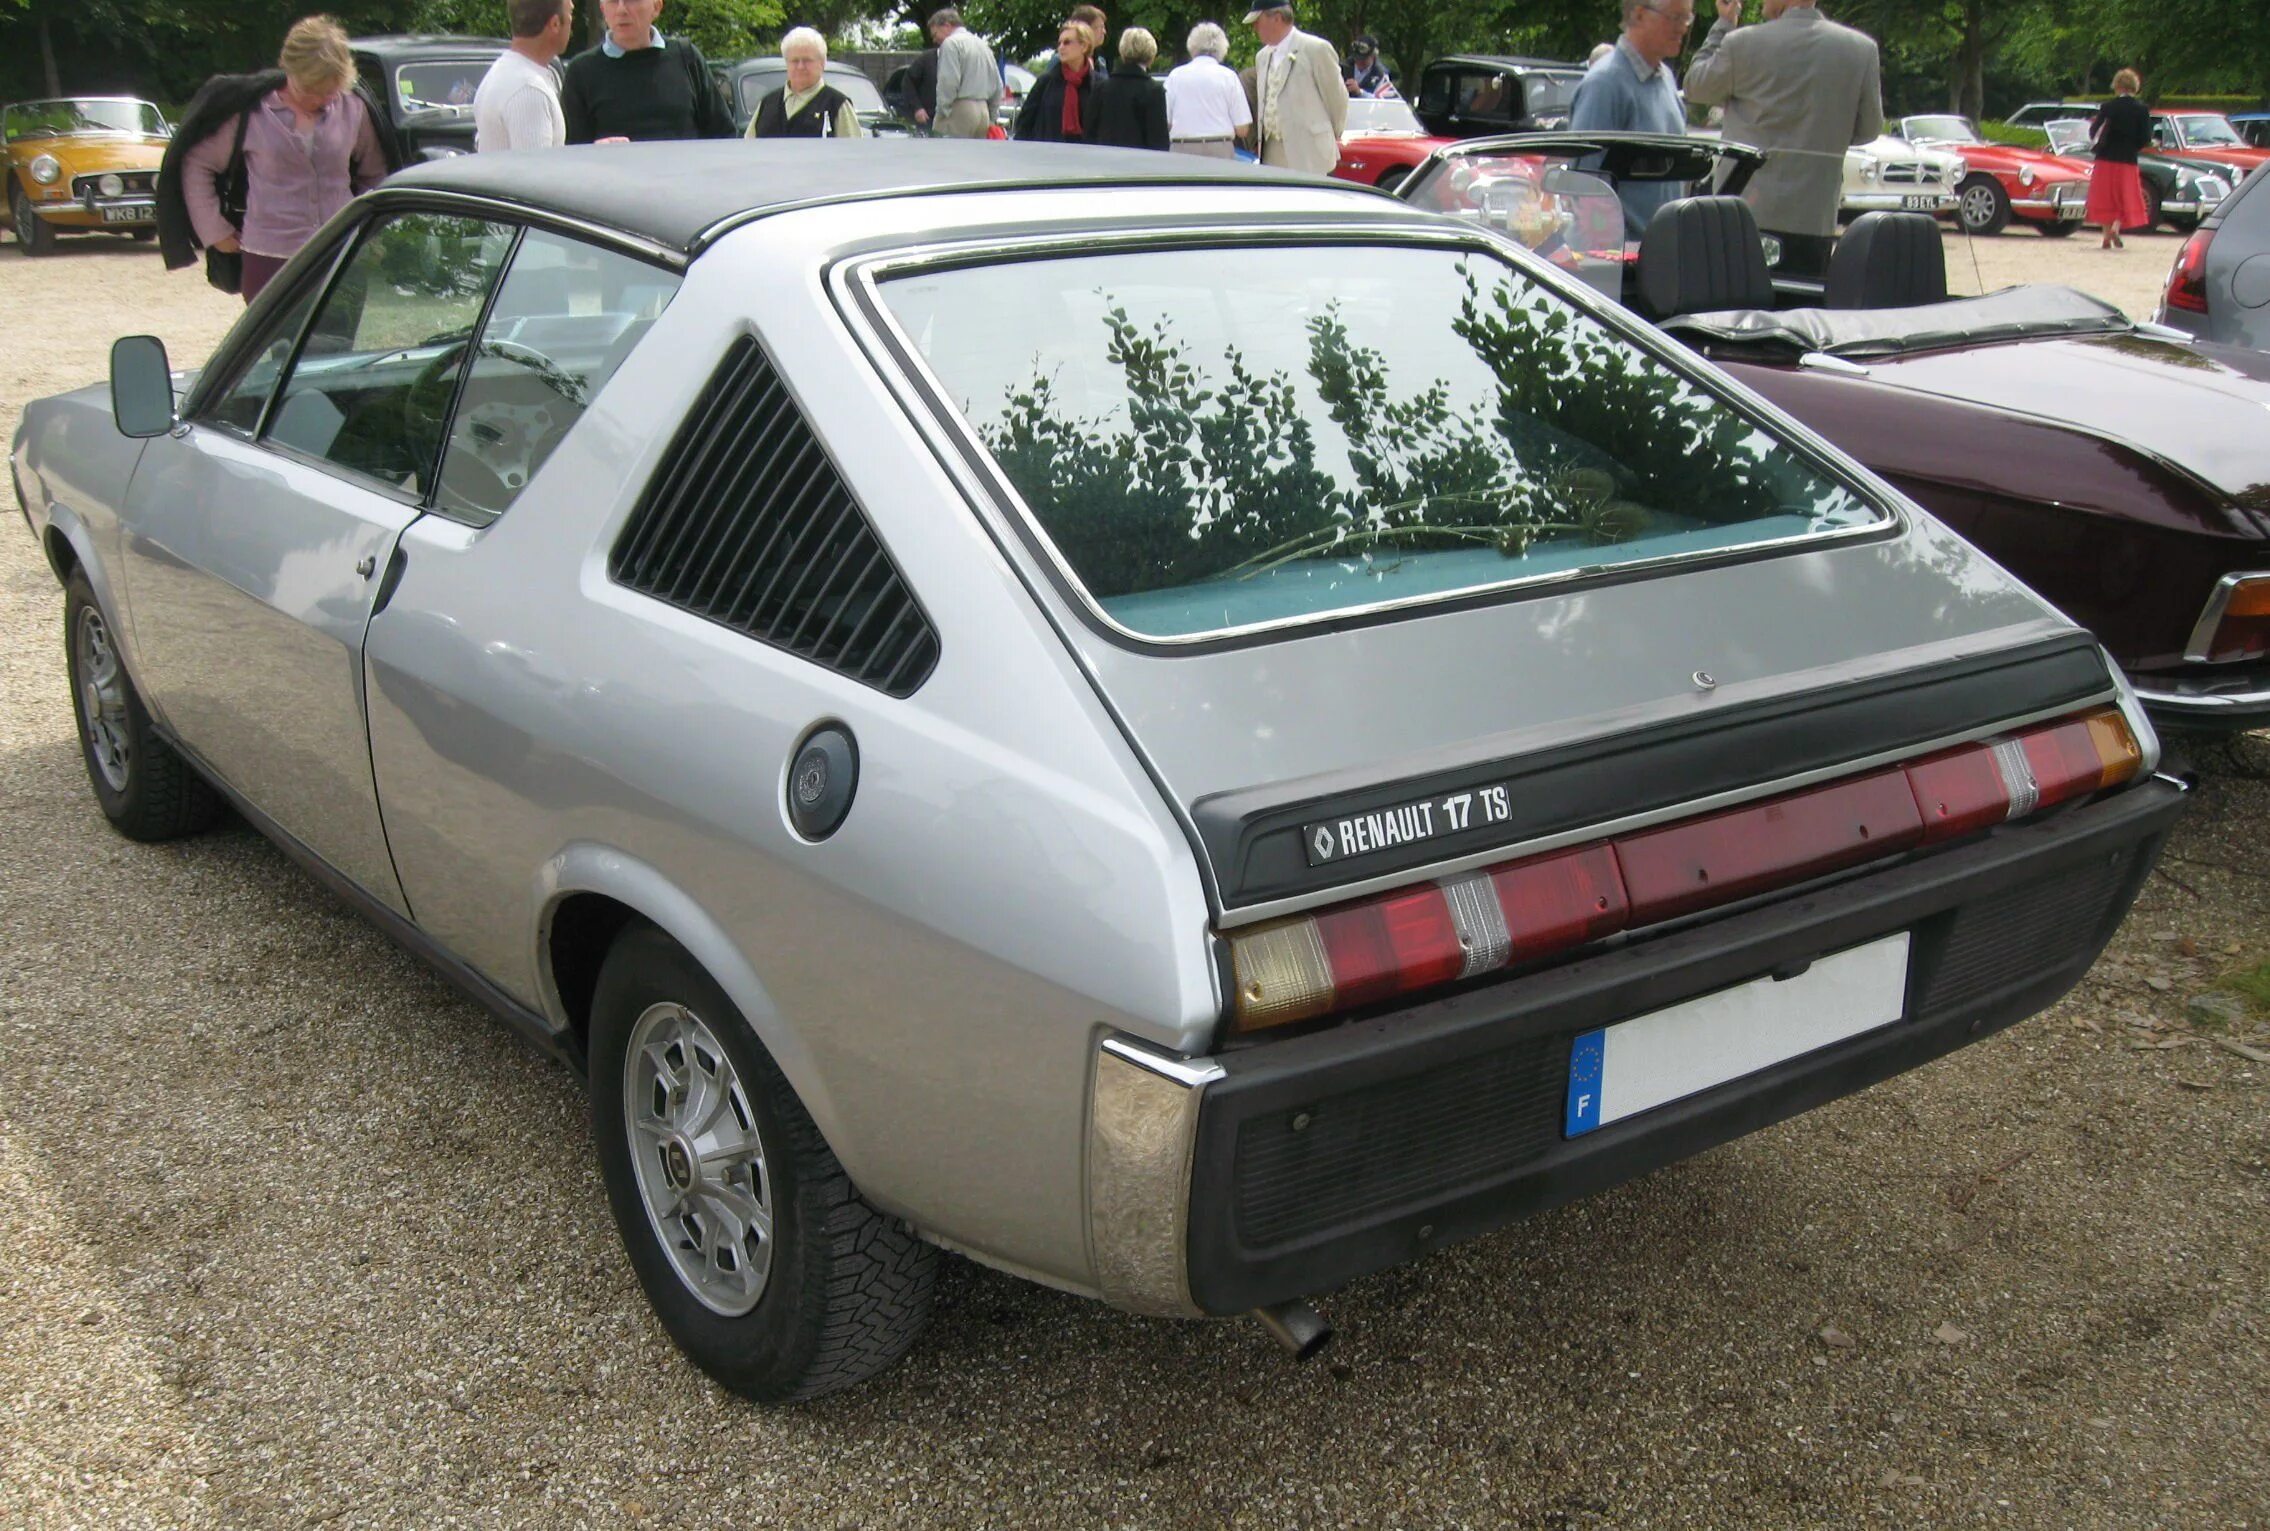 Renault 17 TS. Renault 17tl. Renault 17ts Coupe. Рено 17 ТЛ. Renault 17